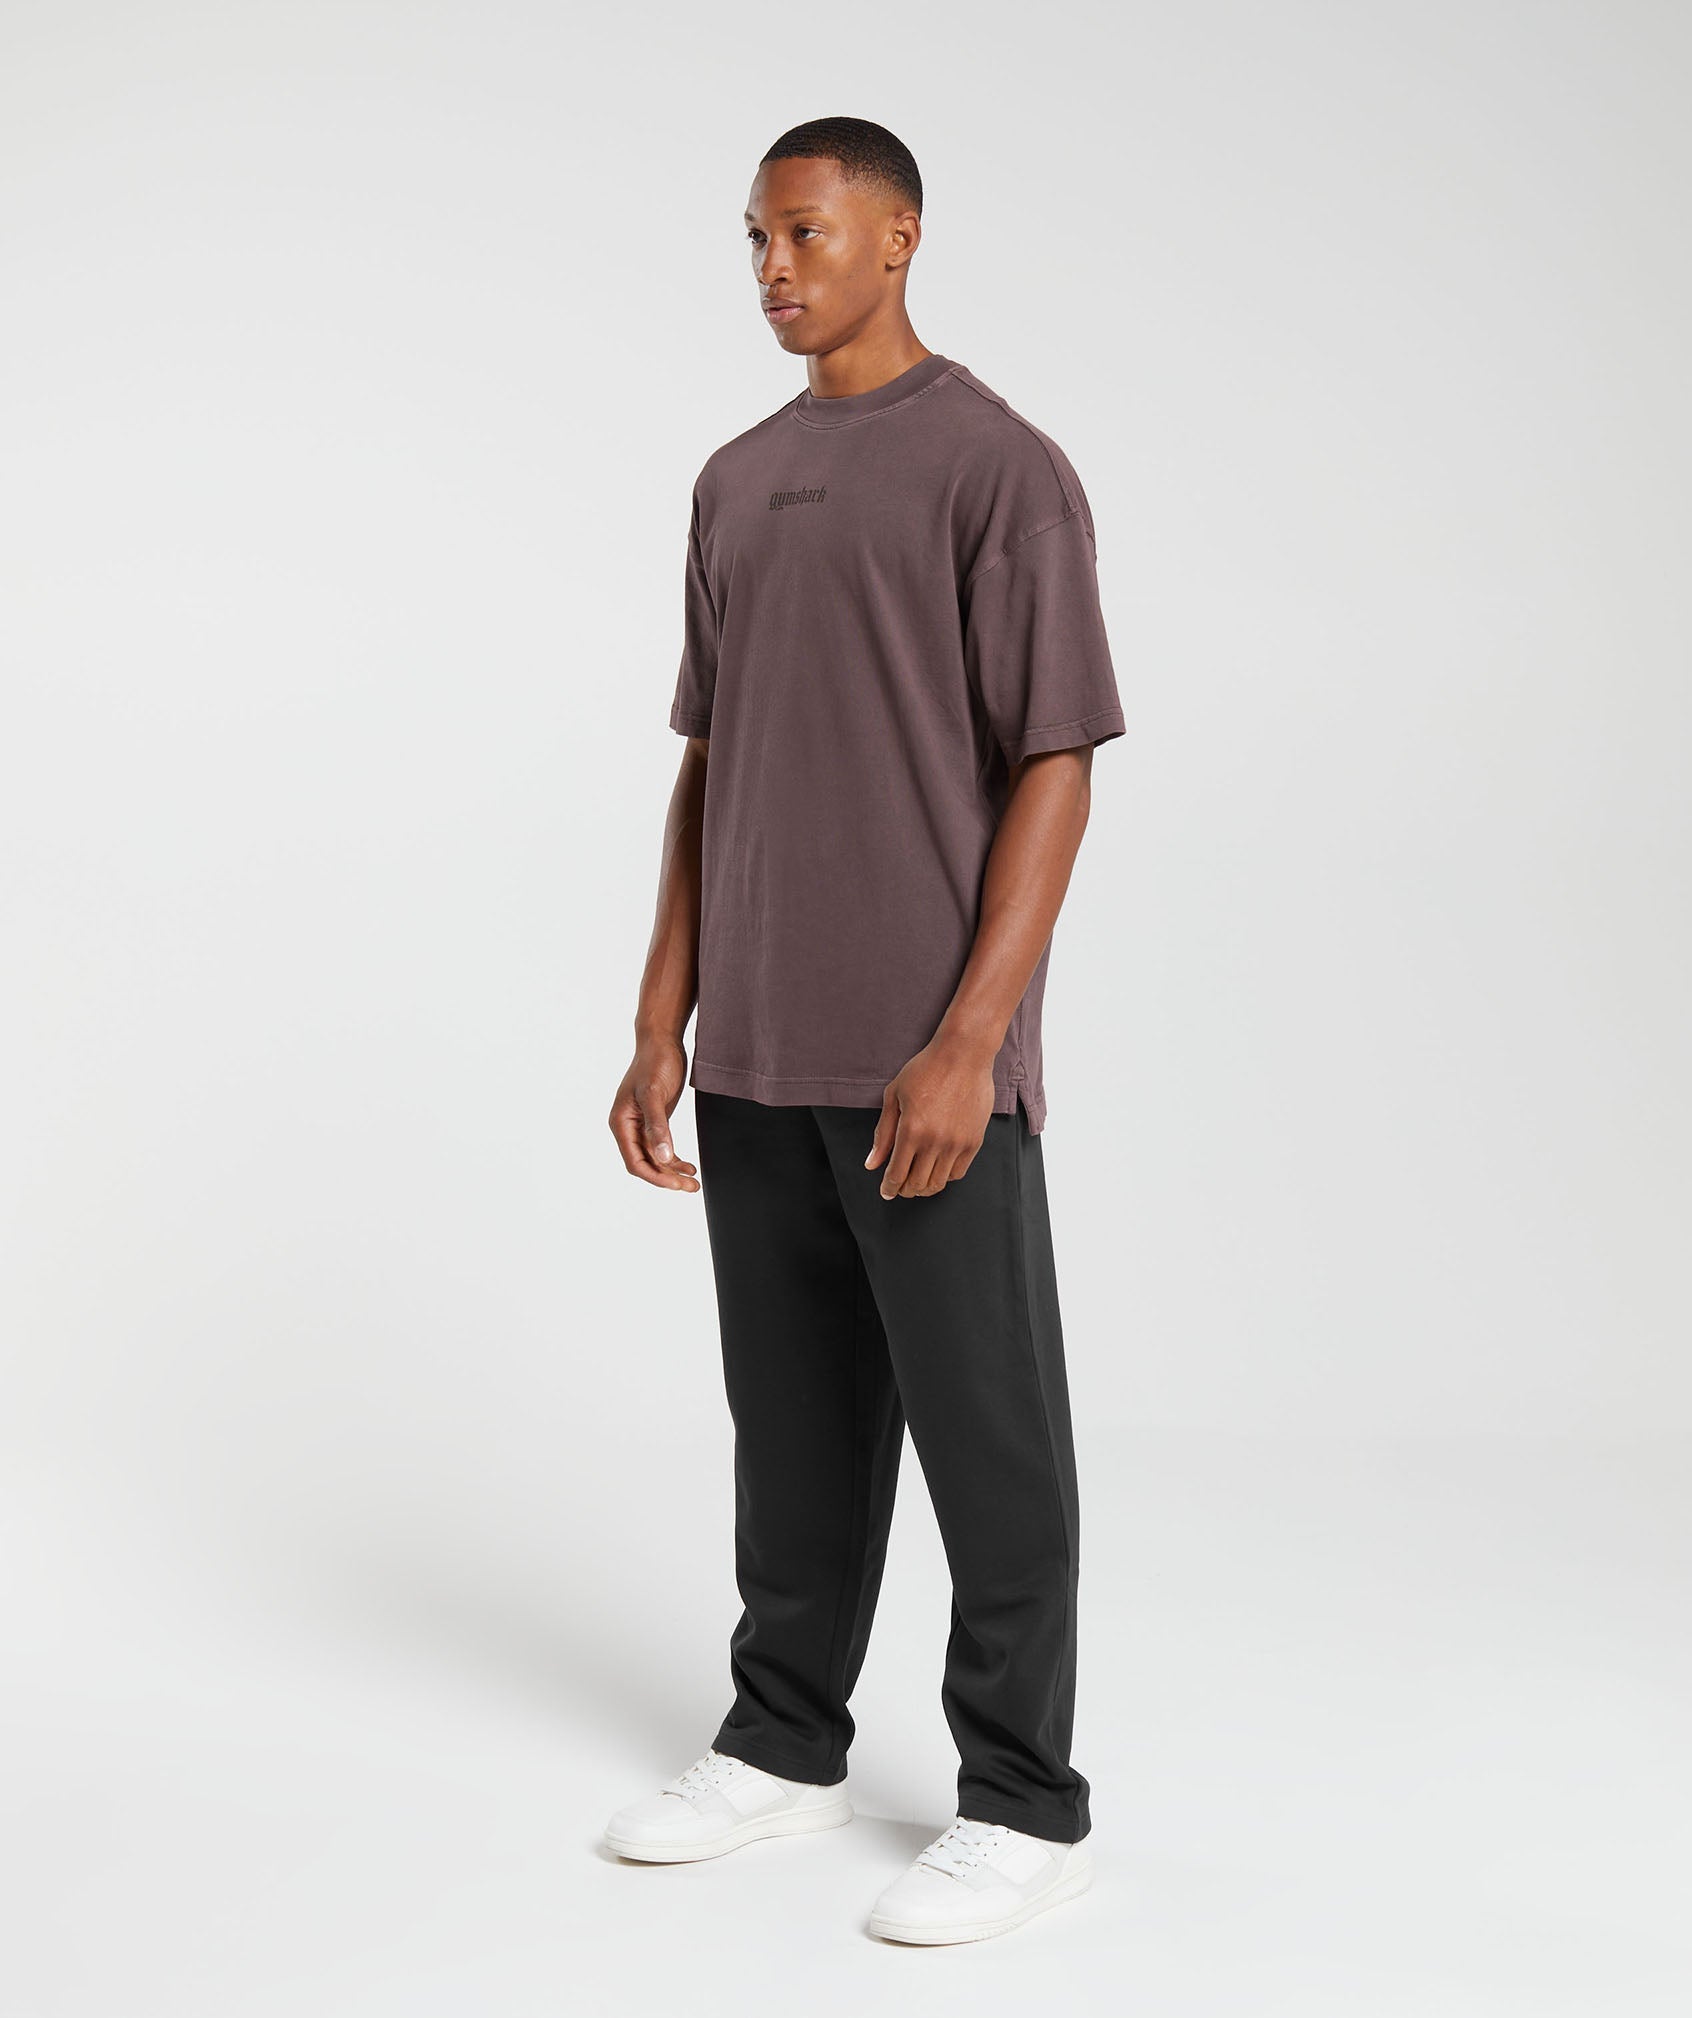 Heavyweight T-Shirt in Cocoa Brown - view 4